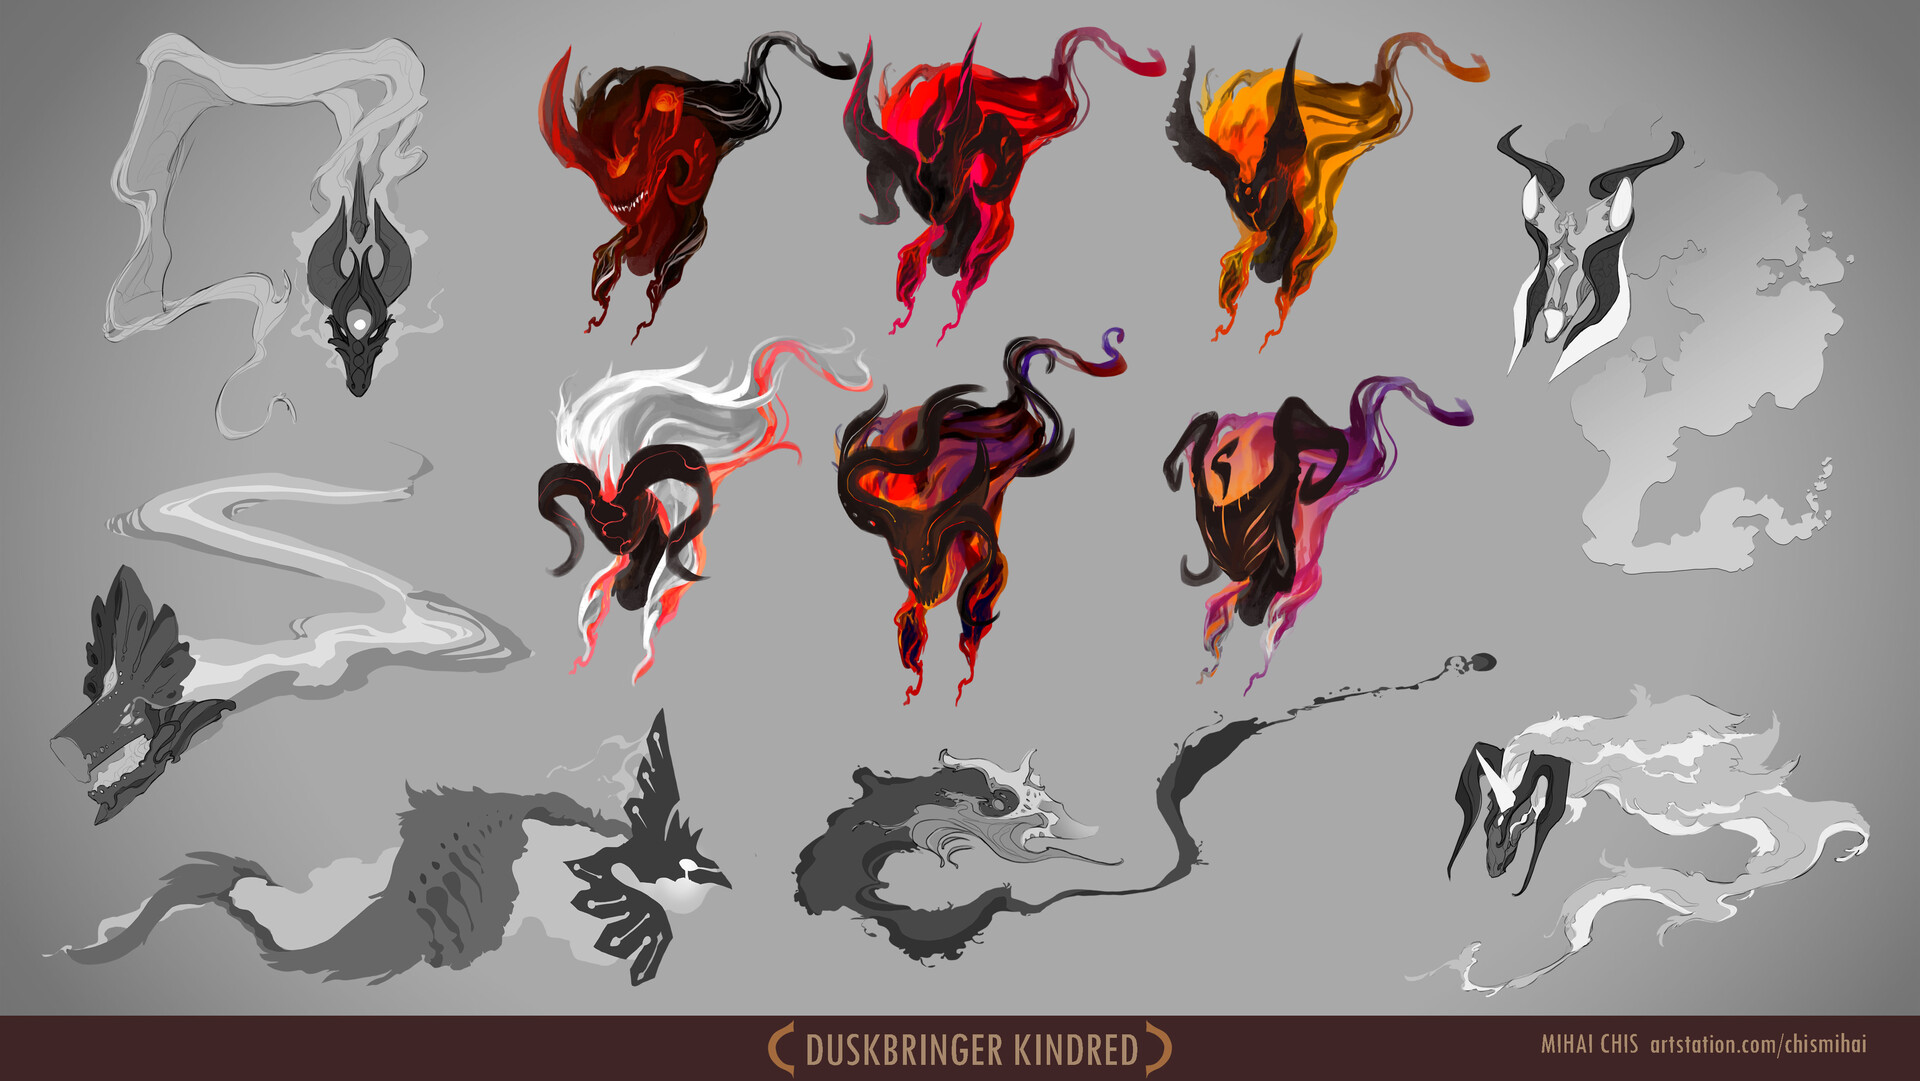 I started the project with some sketches of wolf, trying to make him into different animals, like a peacock, horse, dragon, bull, just exploring what ideas I had in mind as a start. The coloured ones were first explorations for chaos lamb.